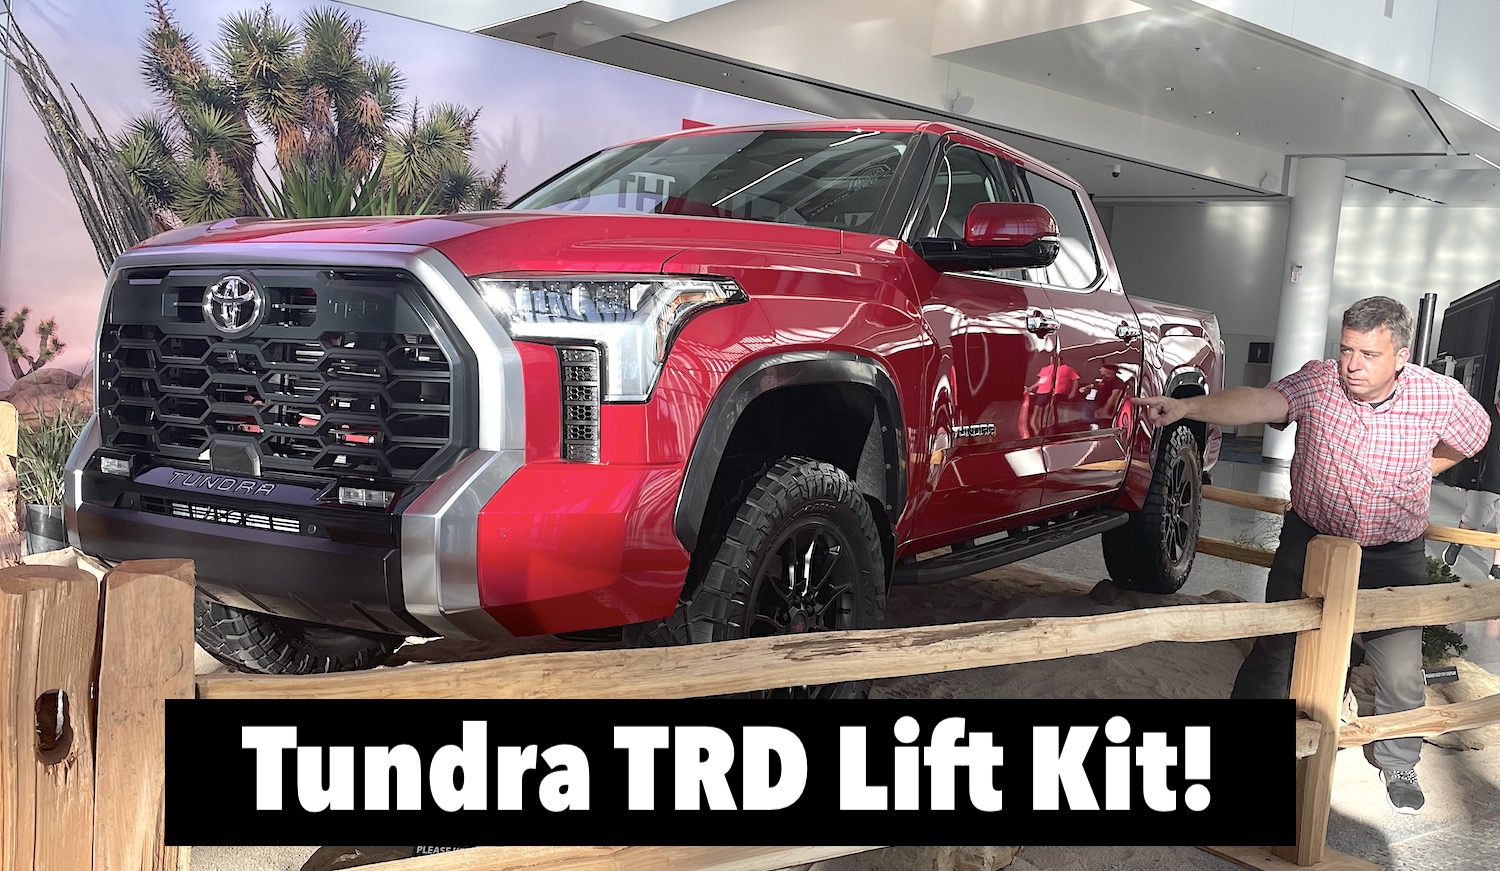 News: Here Is the 2022 Toyota Tundra TRD Lift Kit and How Much It Costs